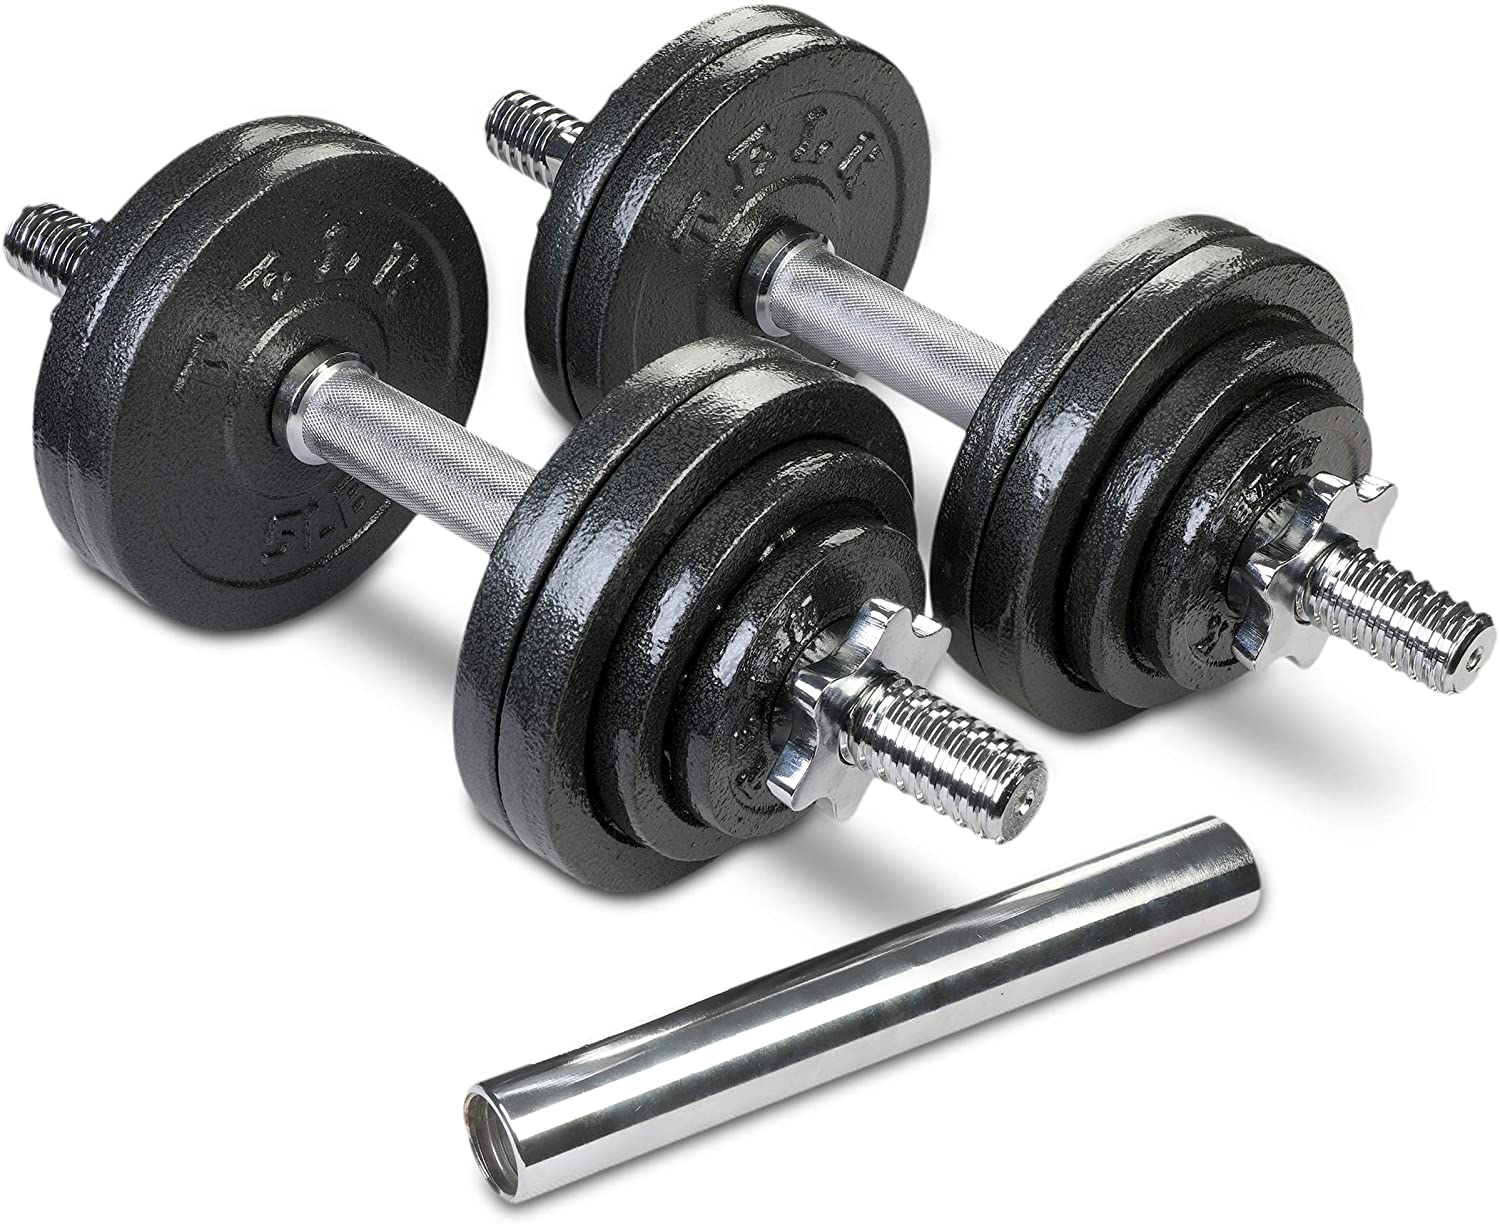 Telk Fitness, Adjustable Dumbbells 65 Lbs., Hand Weights for Home Gym - image 1 of 8